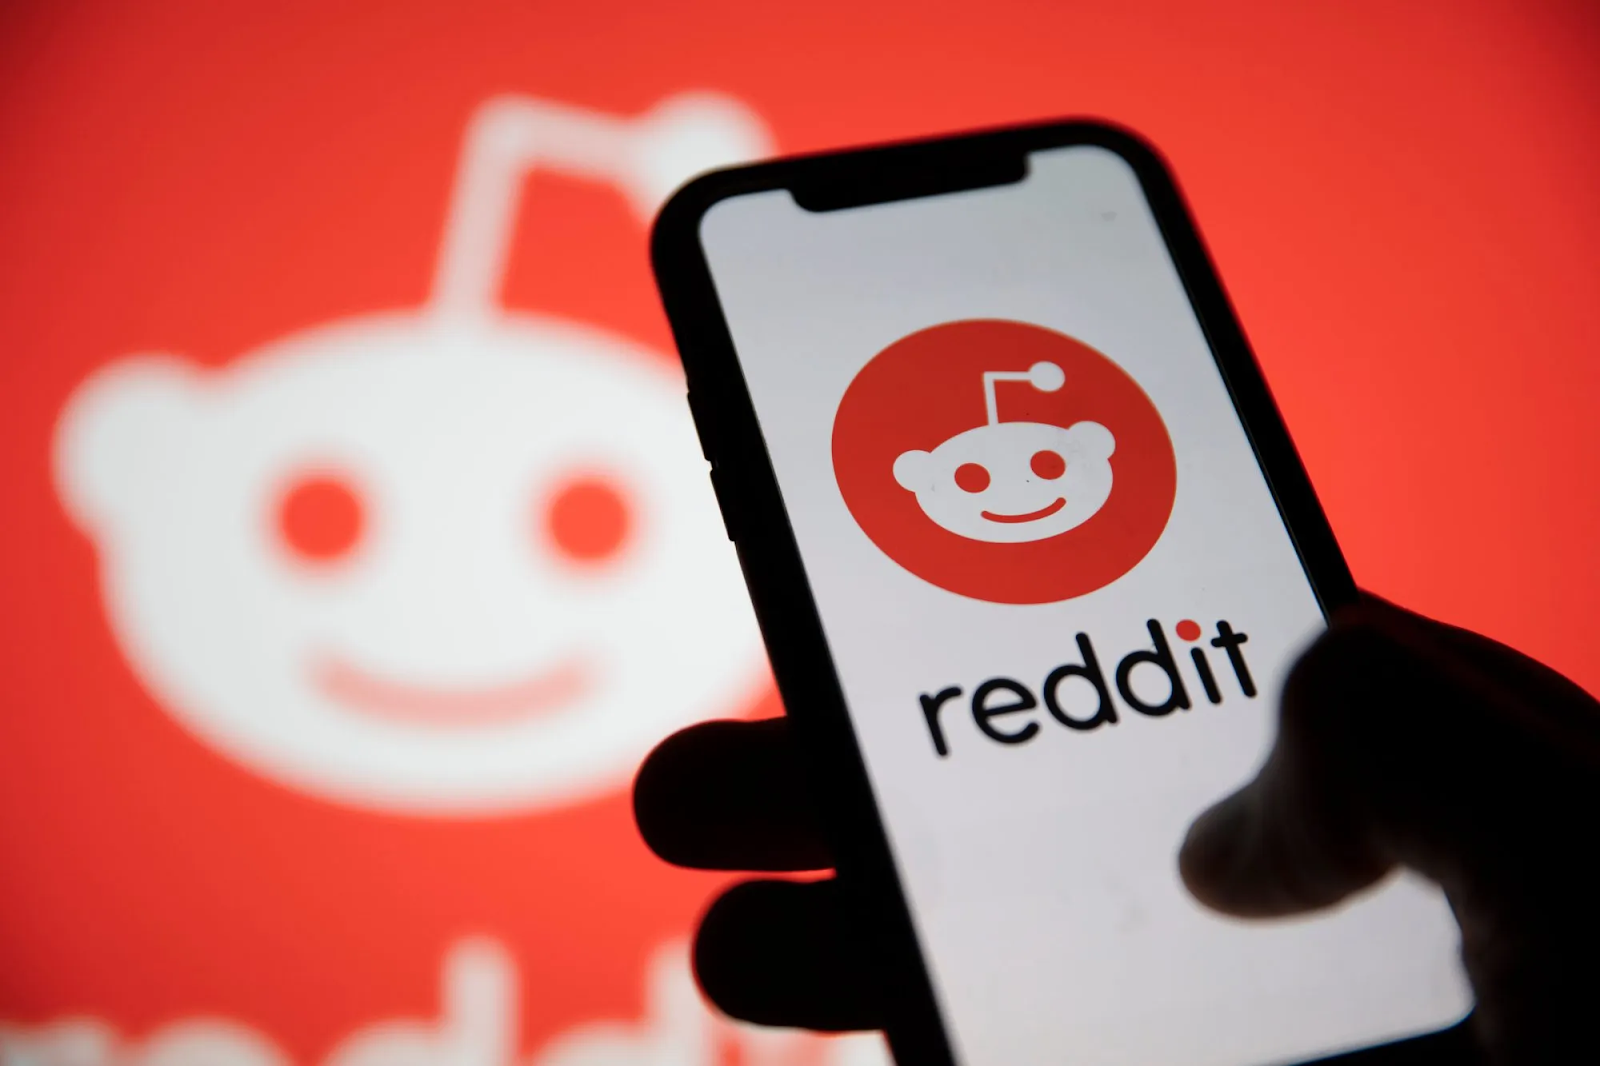 Reddit aims for a valuation of up to $6.4 billion in its highly anticipated US IPO.